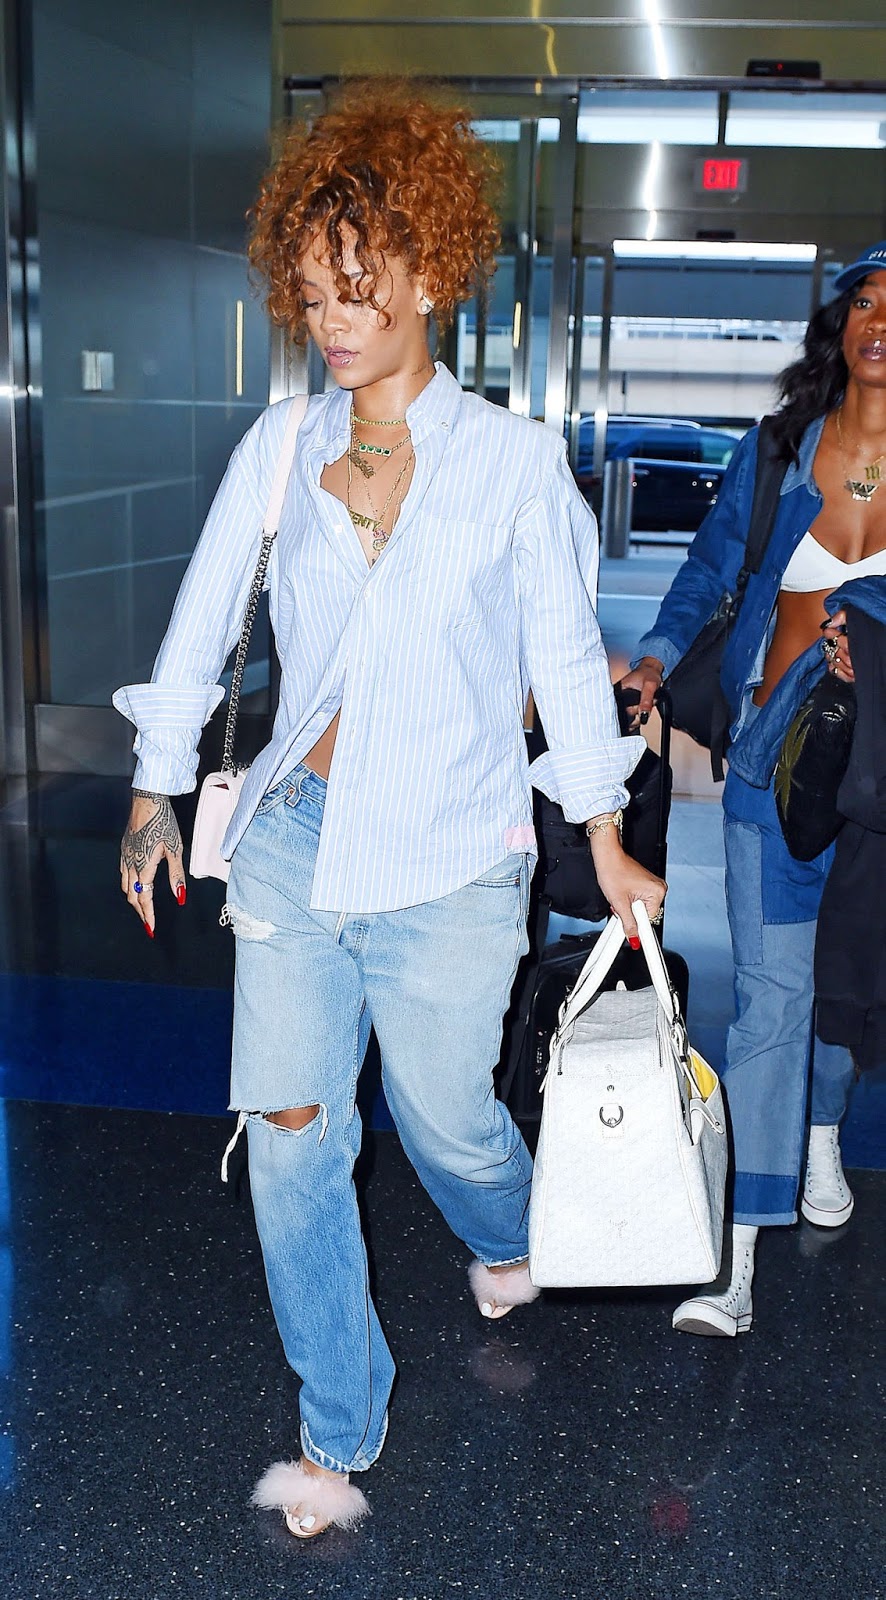 International Celebrities: Rihanna in Jeans at JFK airport in NYC